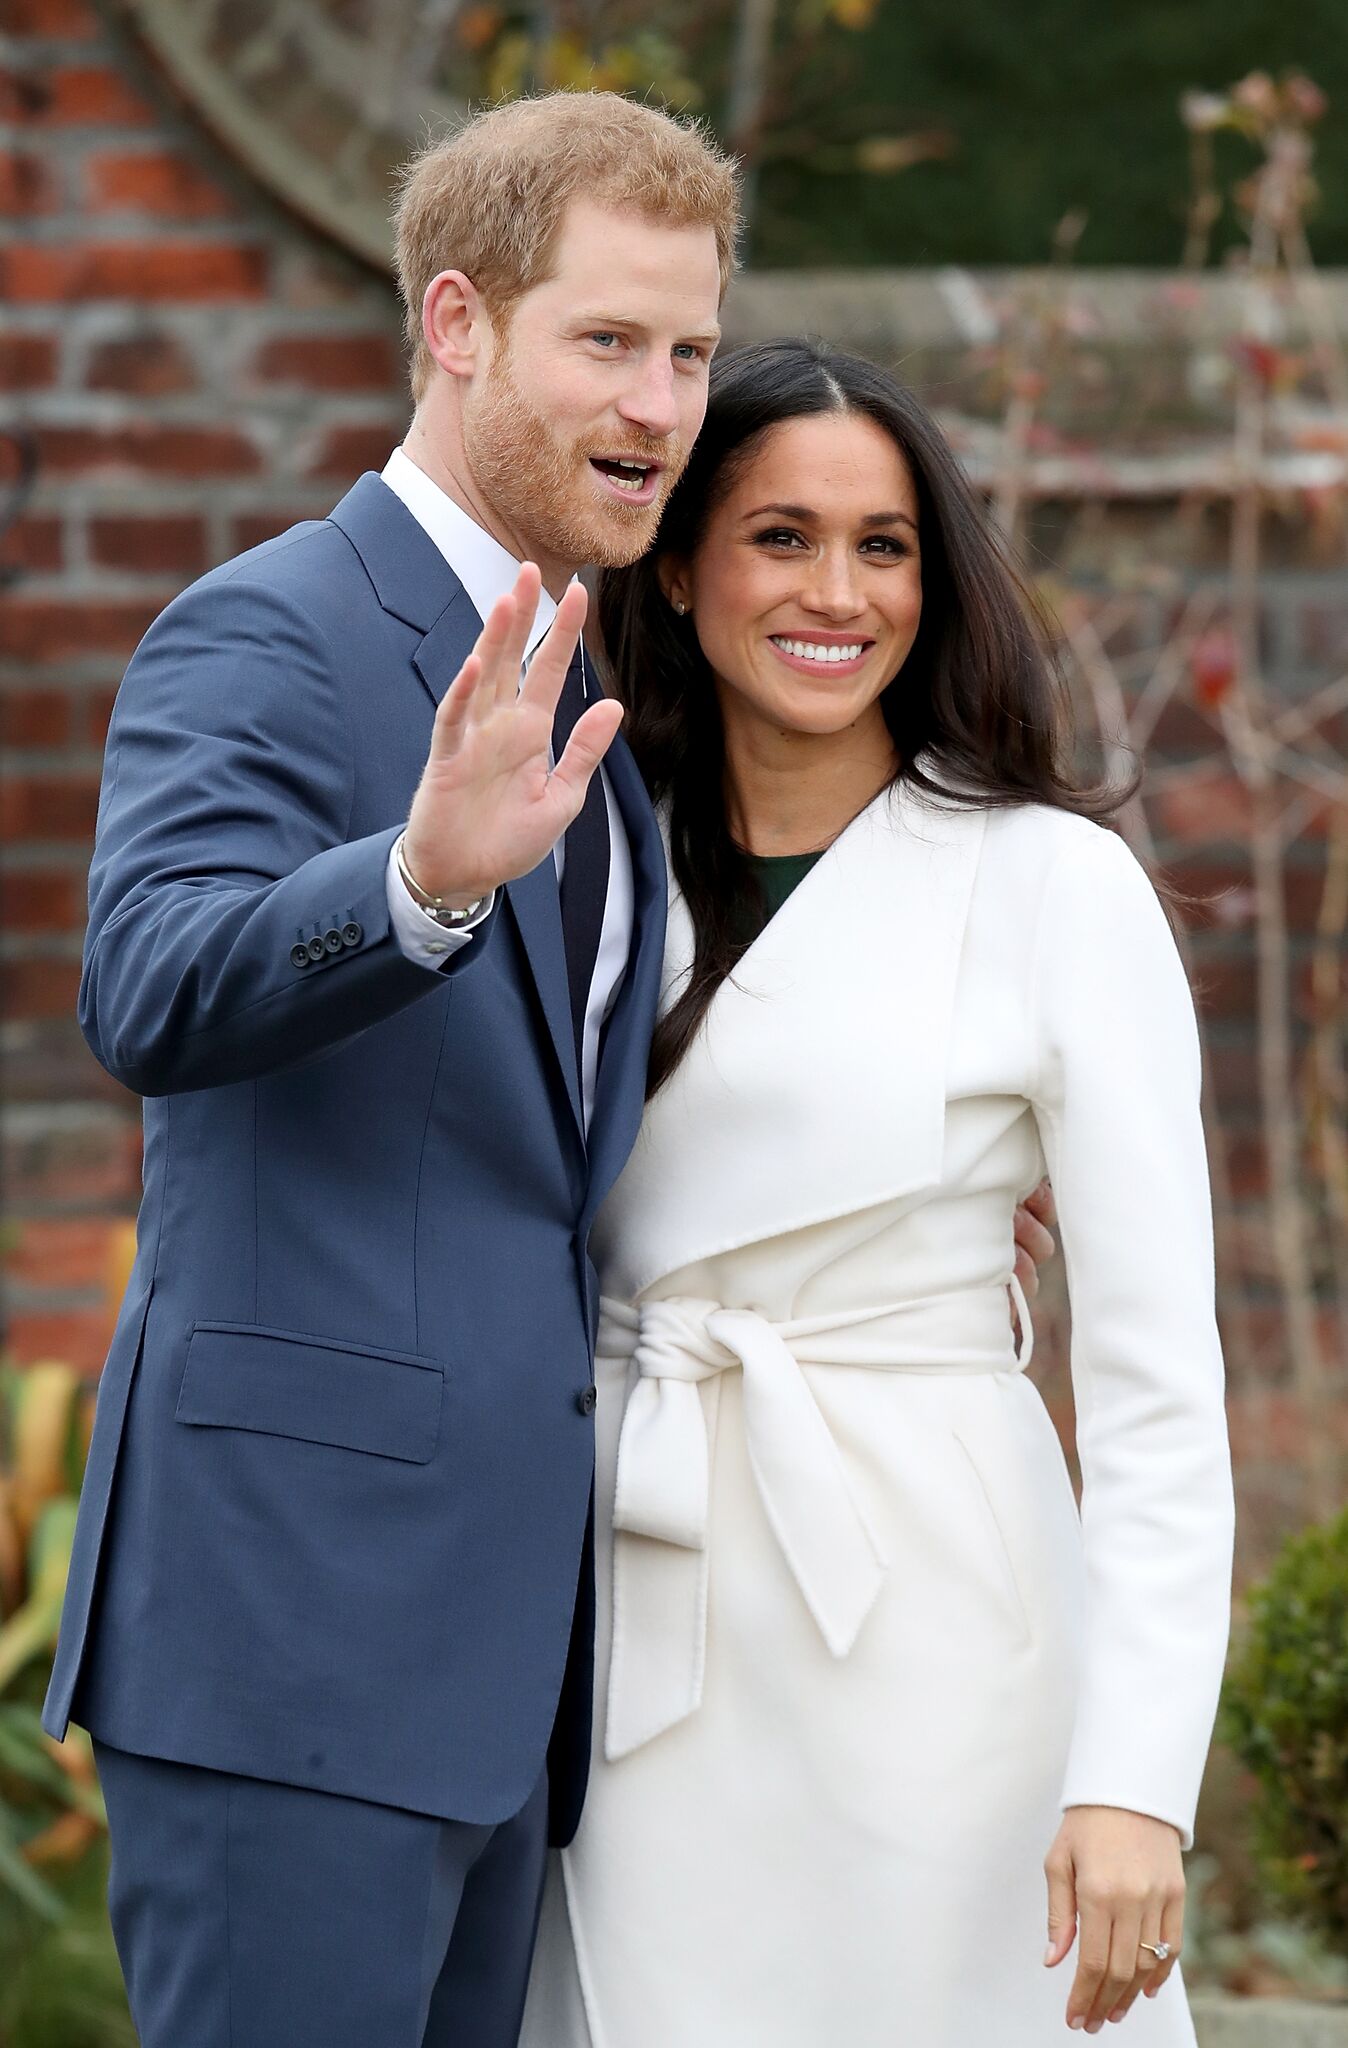 Prince Harry and actress Meghan Markle during an official photocall to announce their engagement at The Sunken Gardens at Kensington Palace | Getty Images